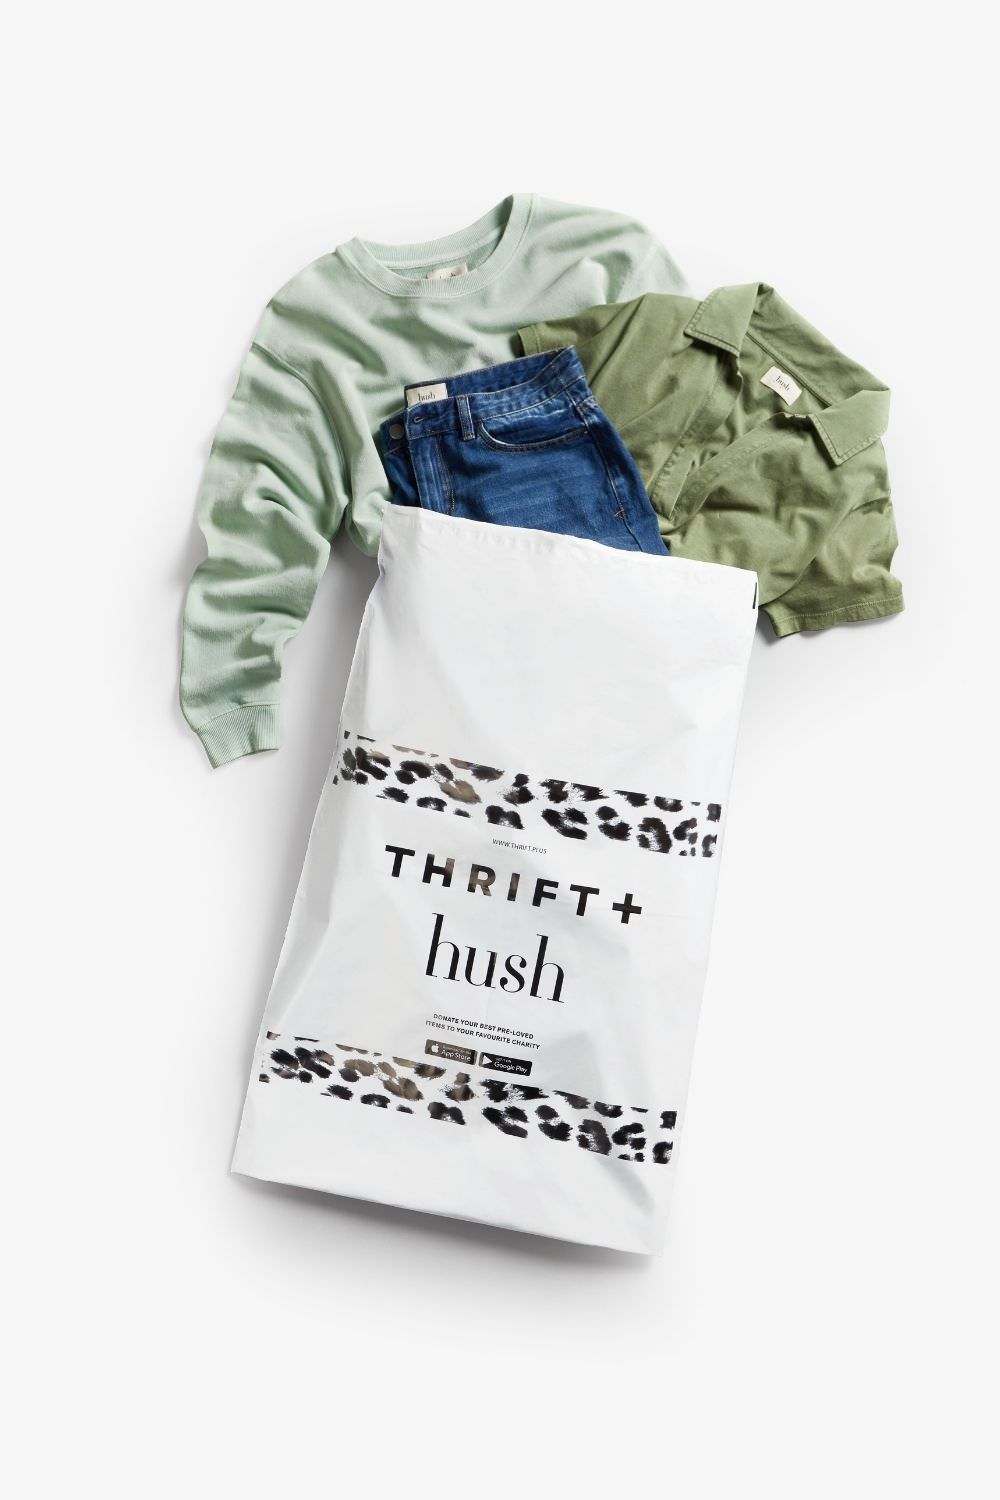 Thrift and Hush Mailing bag with clothes coming out of the bag